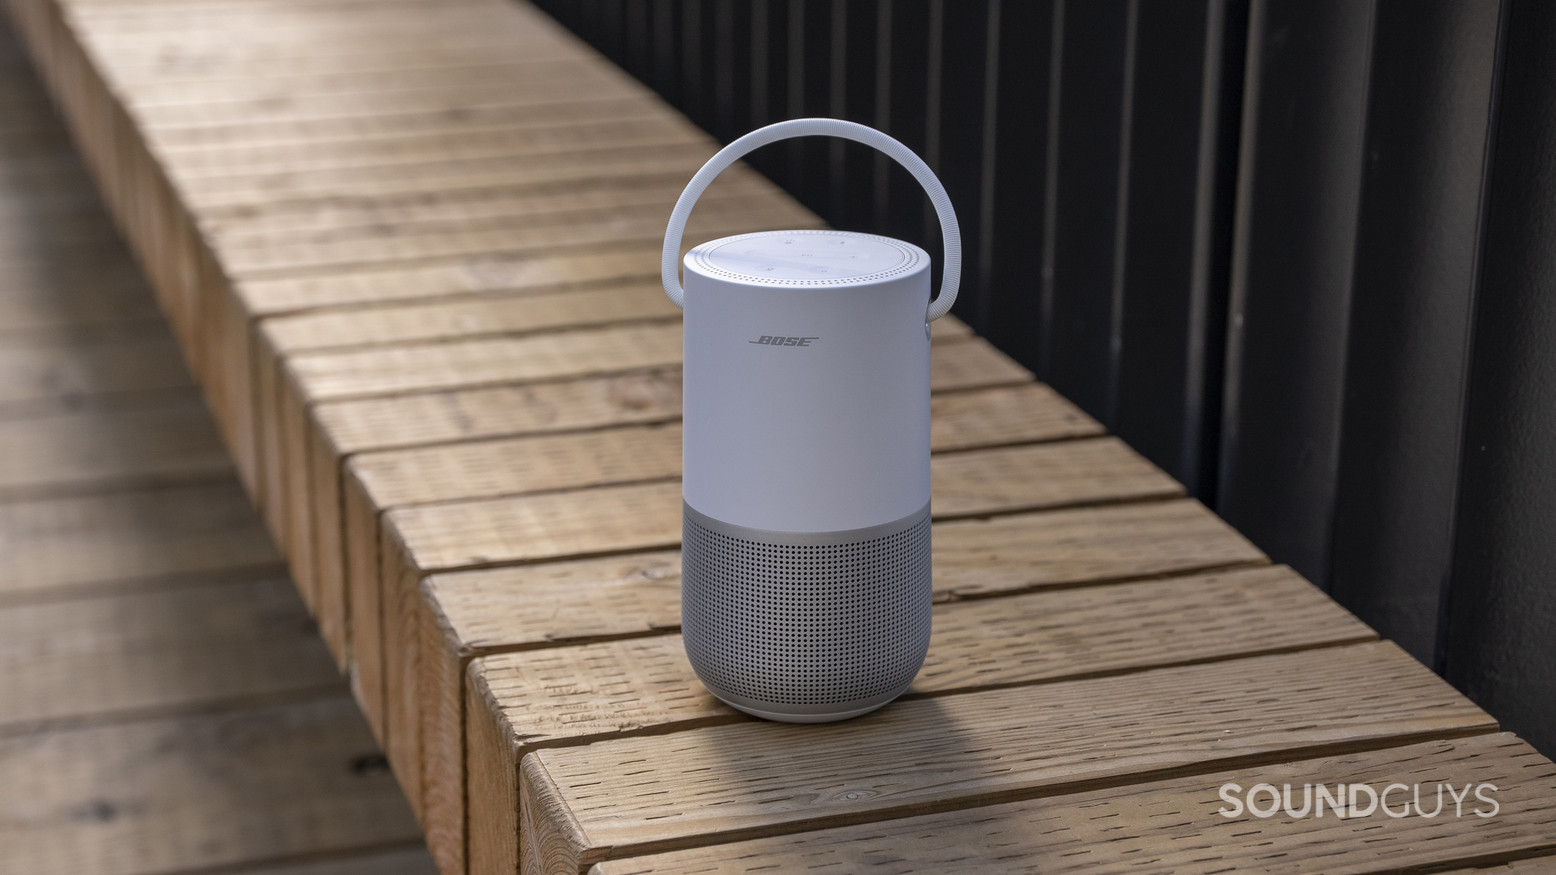 A Bose Portable Smart Speaker sitting on a wooden bench outdoors.